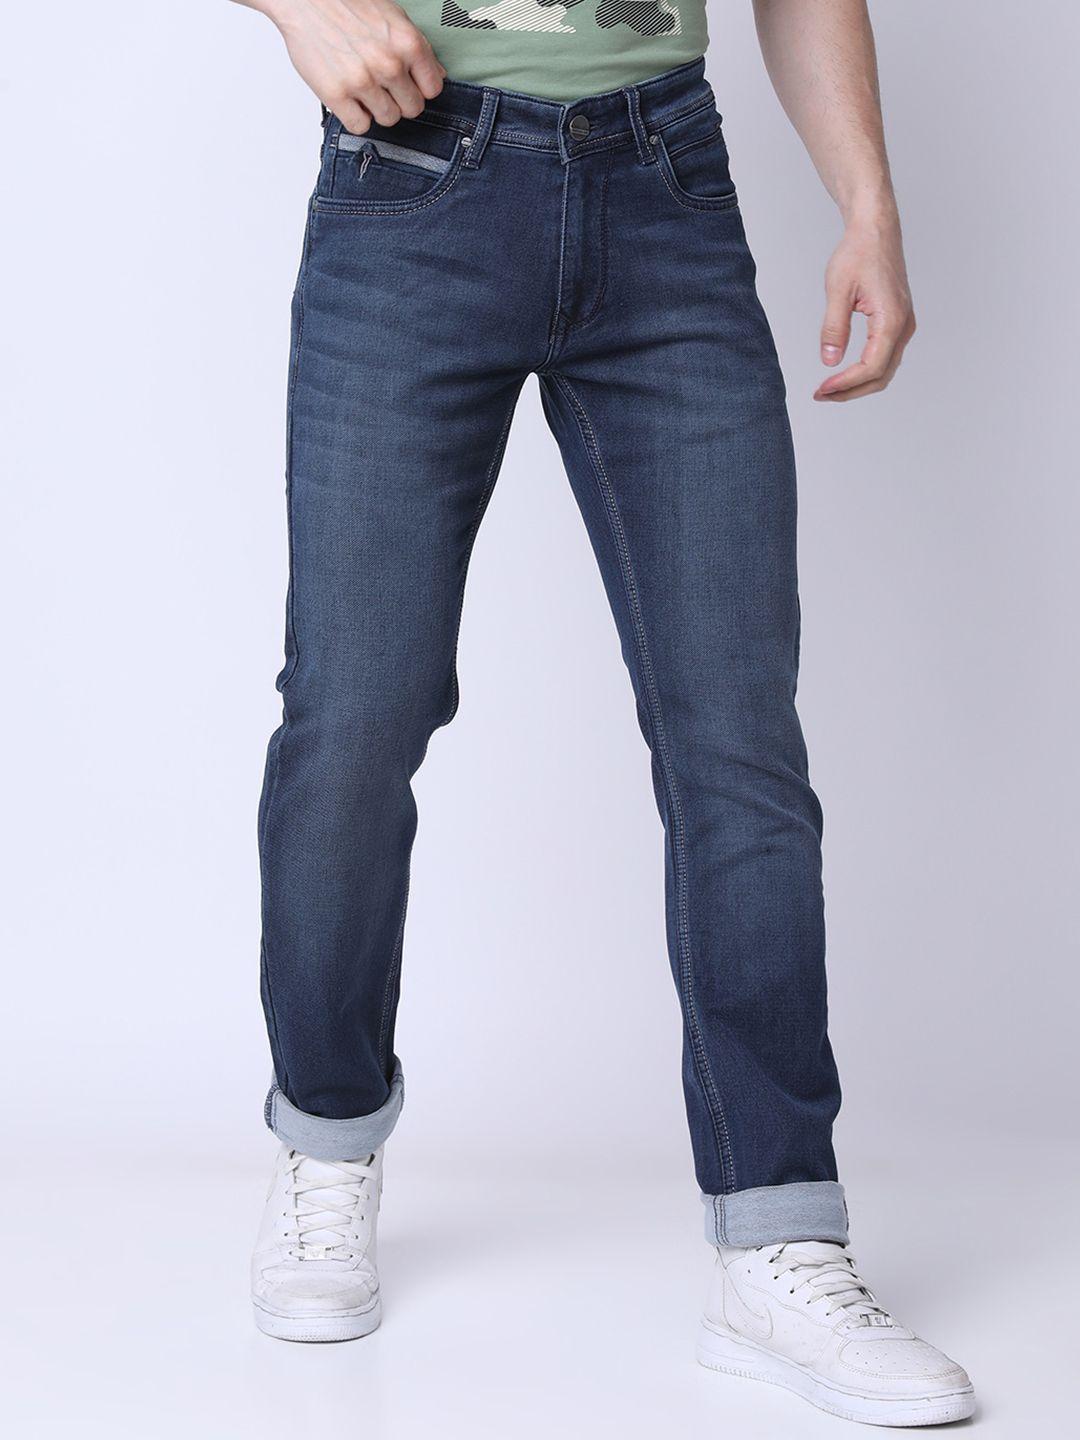 oxemberg-men-mid-rise-clean-look-slim-fit-lean-light-fade-jeans